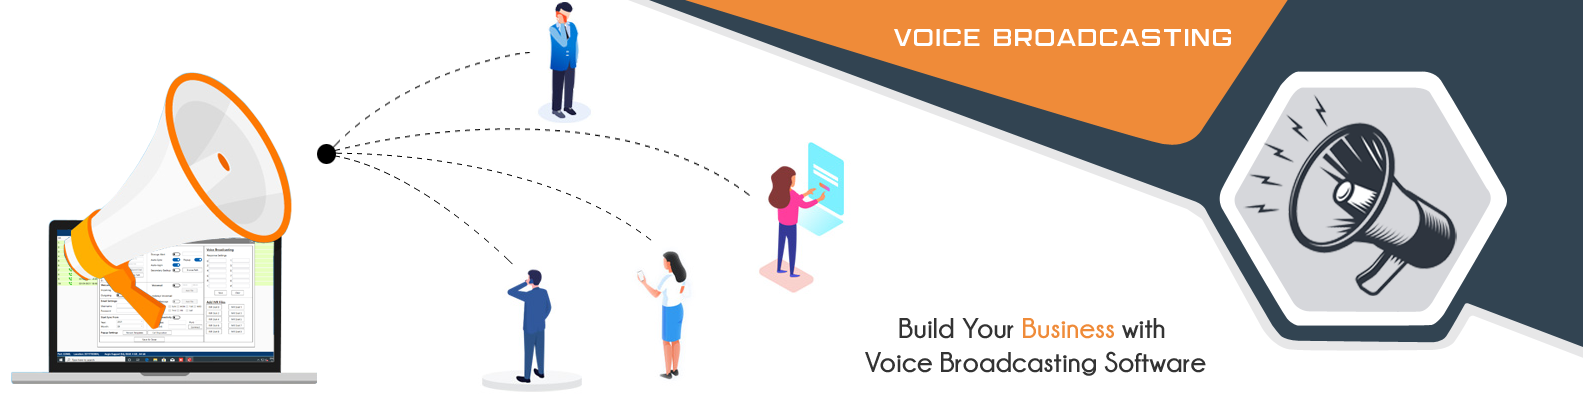 voice broadcasting banner